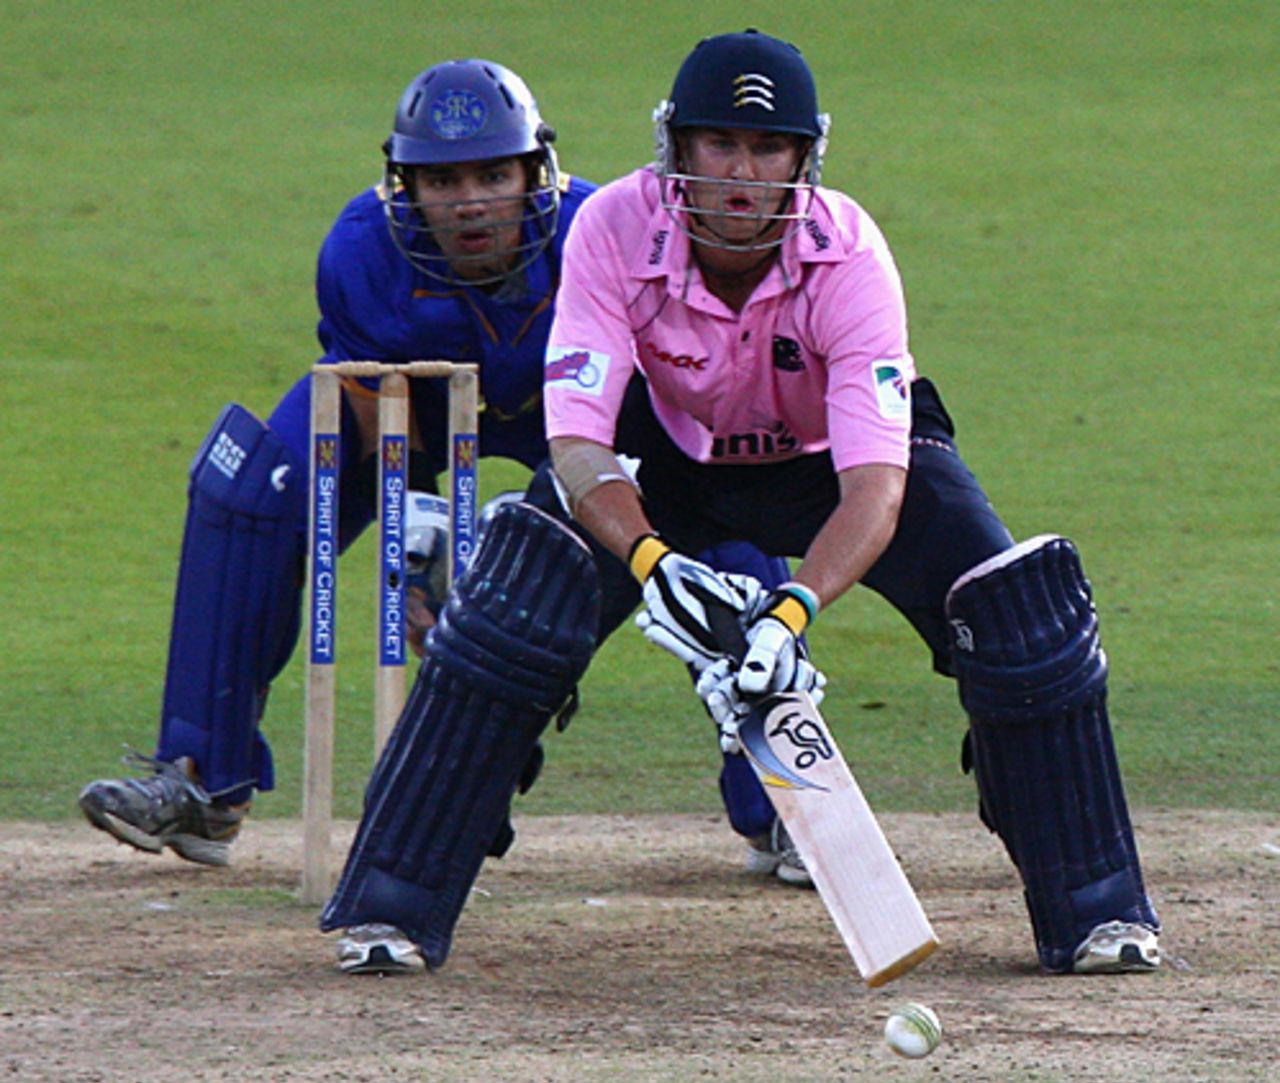 Dawid Malan tries to be unorthodox, Middlesex v Rajasthan Royals, British Asian Cup, Lord's, July 6, 2009